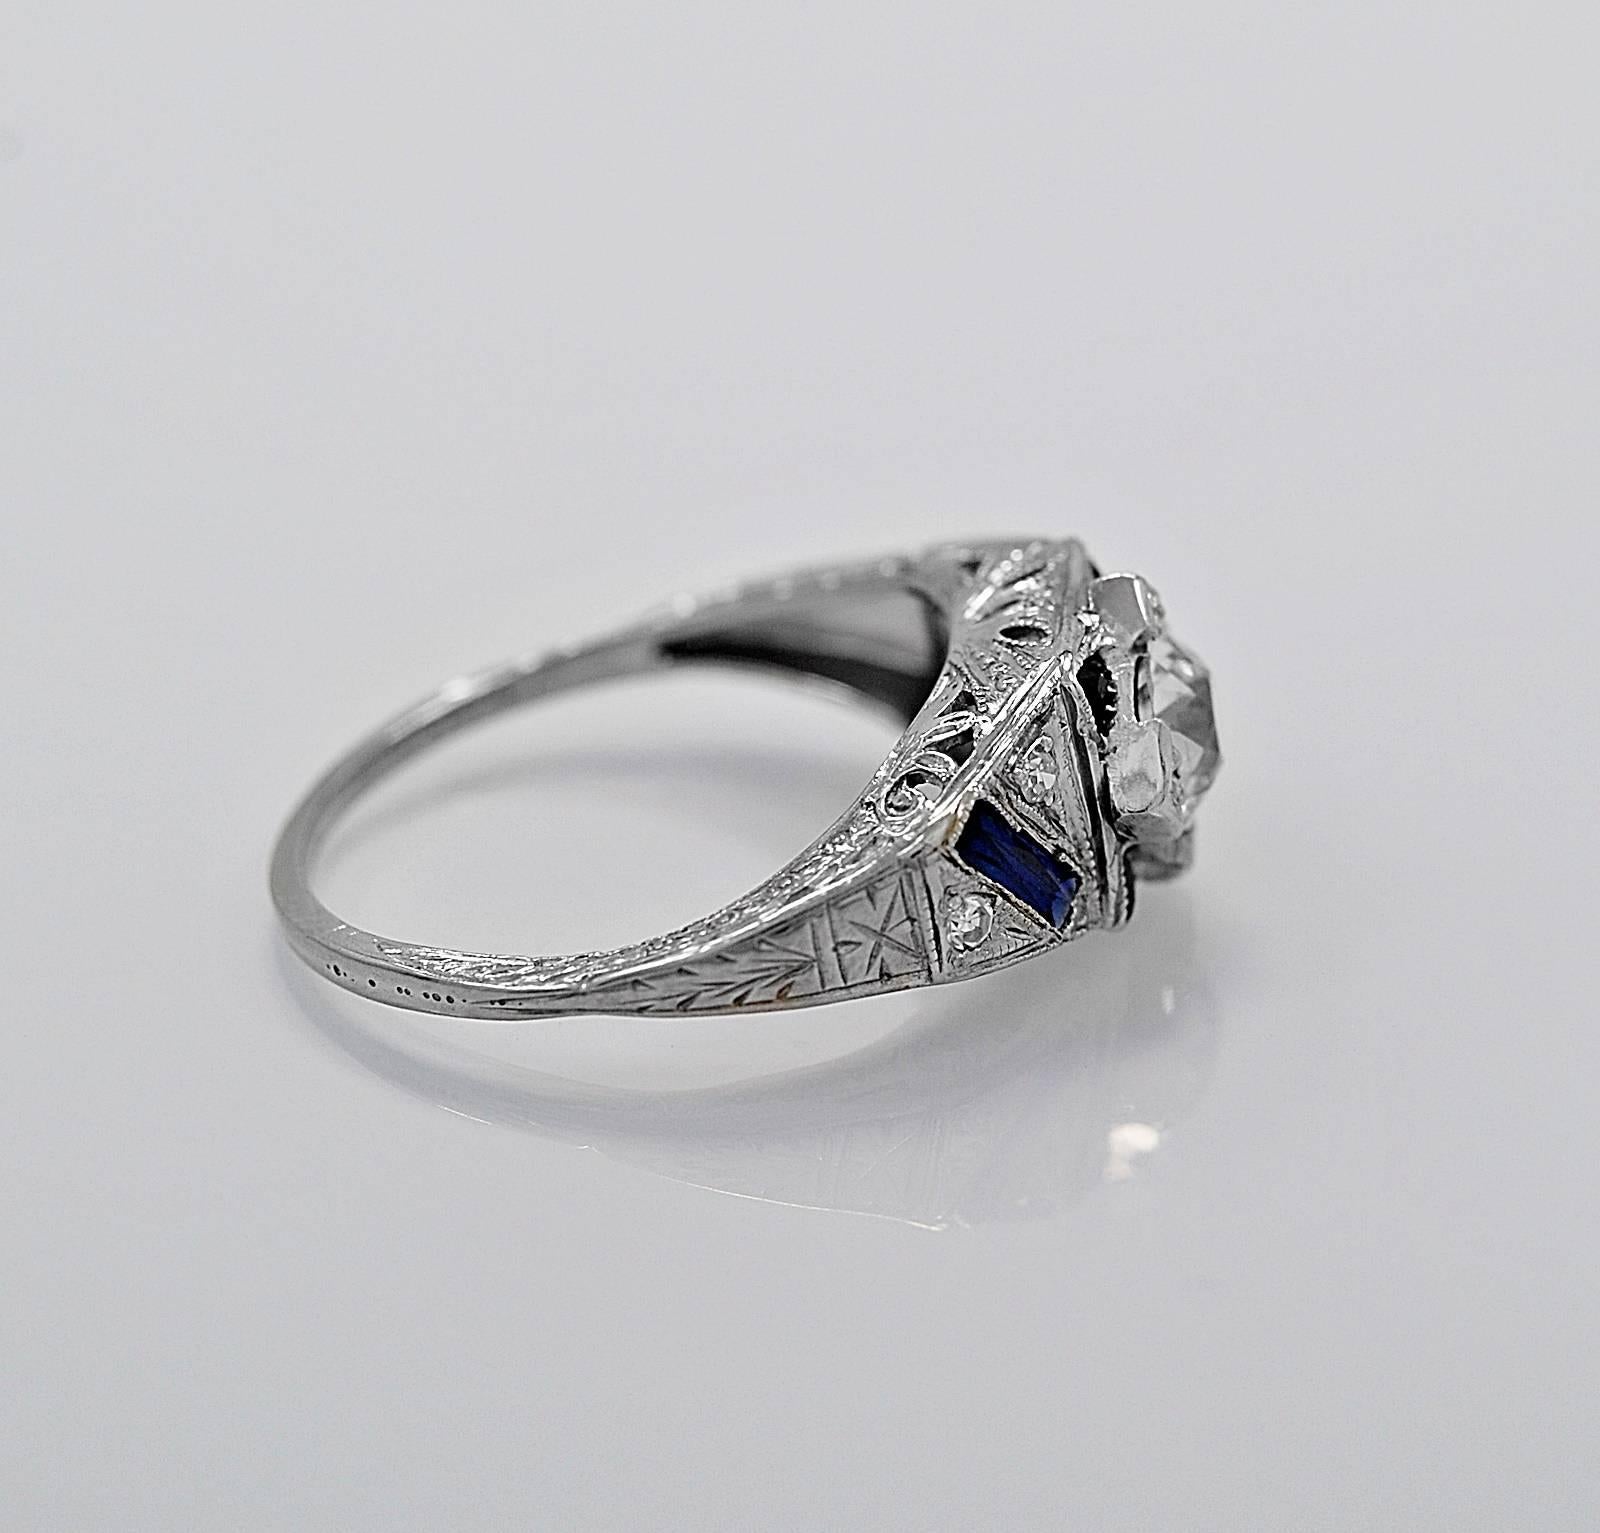 A gorgeous antique engagement ring featuring a .60ct. apx. European cut center diamond with VS1 clarity and I-J color. It is accented with .08ct. apx. T.W. of sparkling single cuts and .50ct. apx. T.W. of synthetic sapphires. The center diamond is